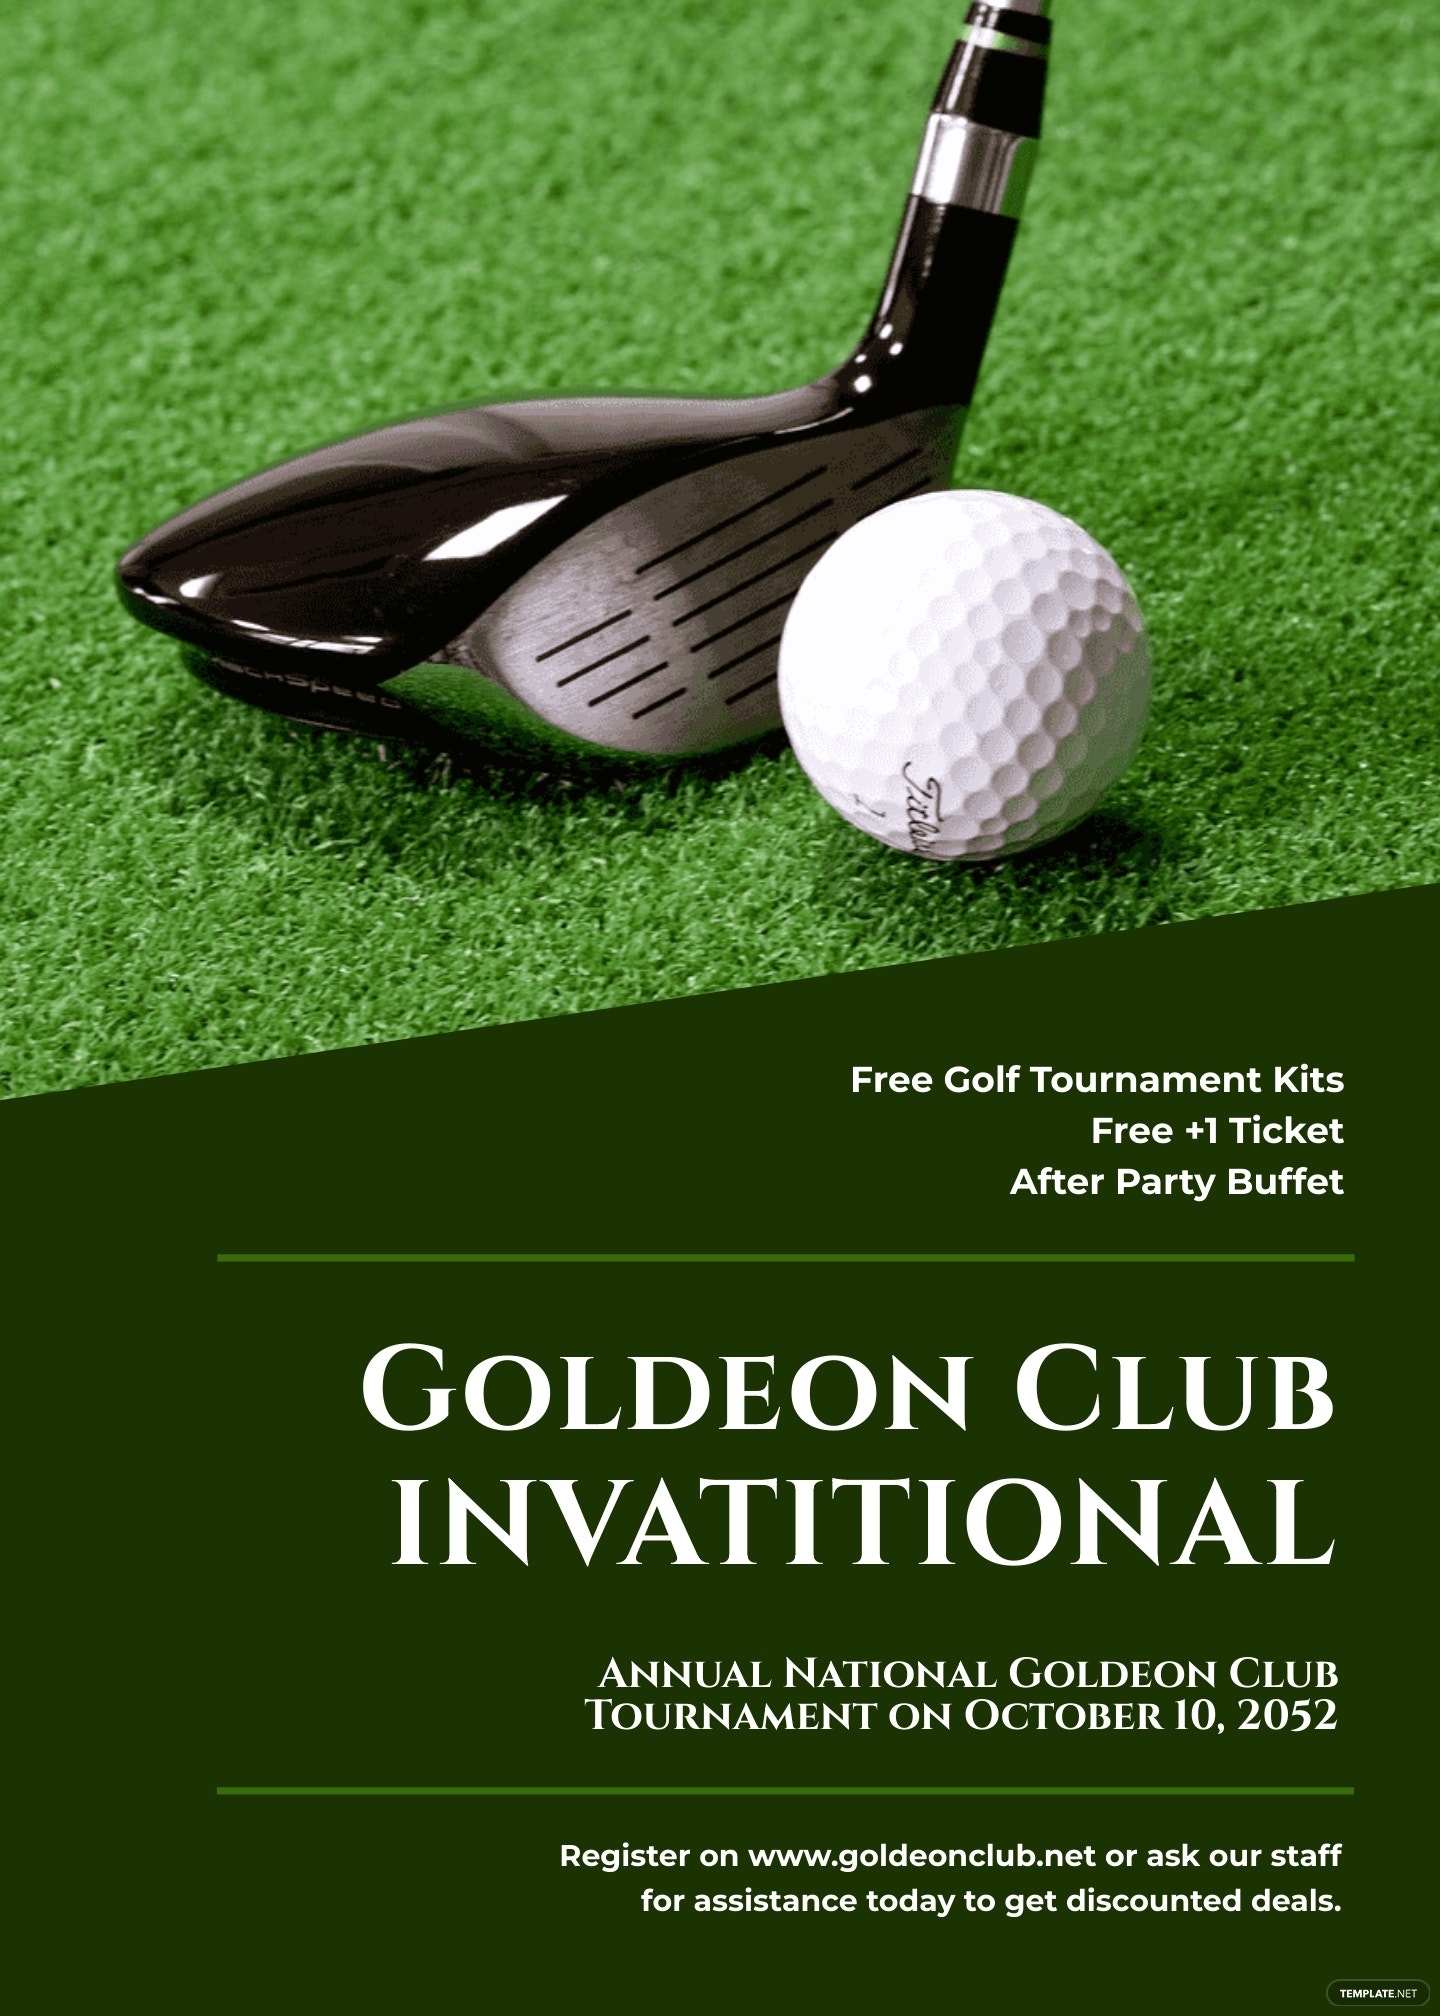 Printable Free Golf Templates For Word